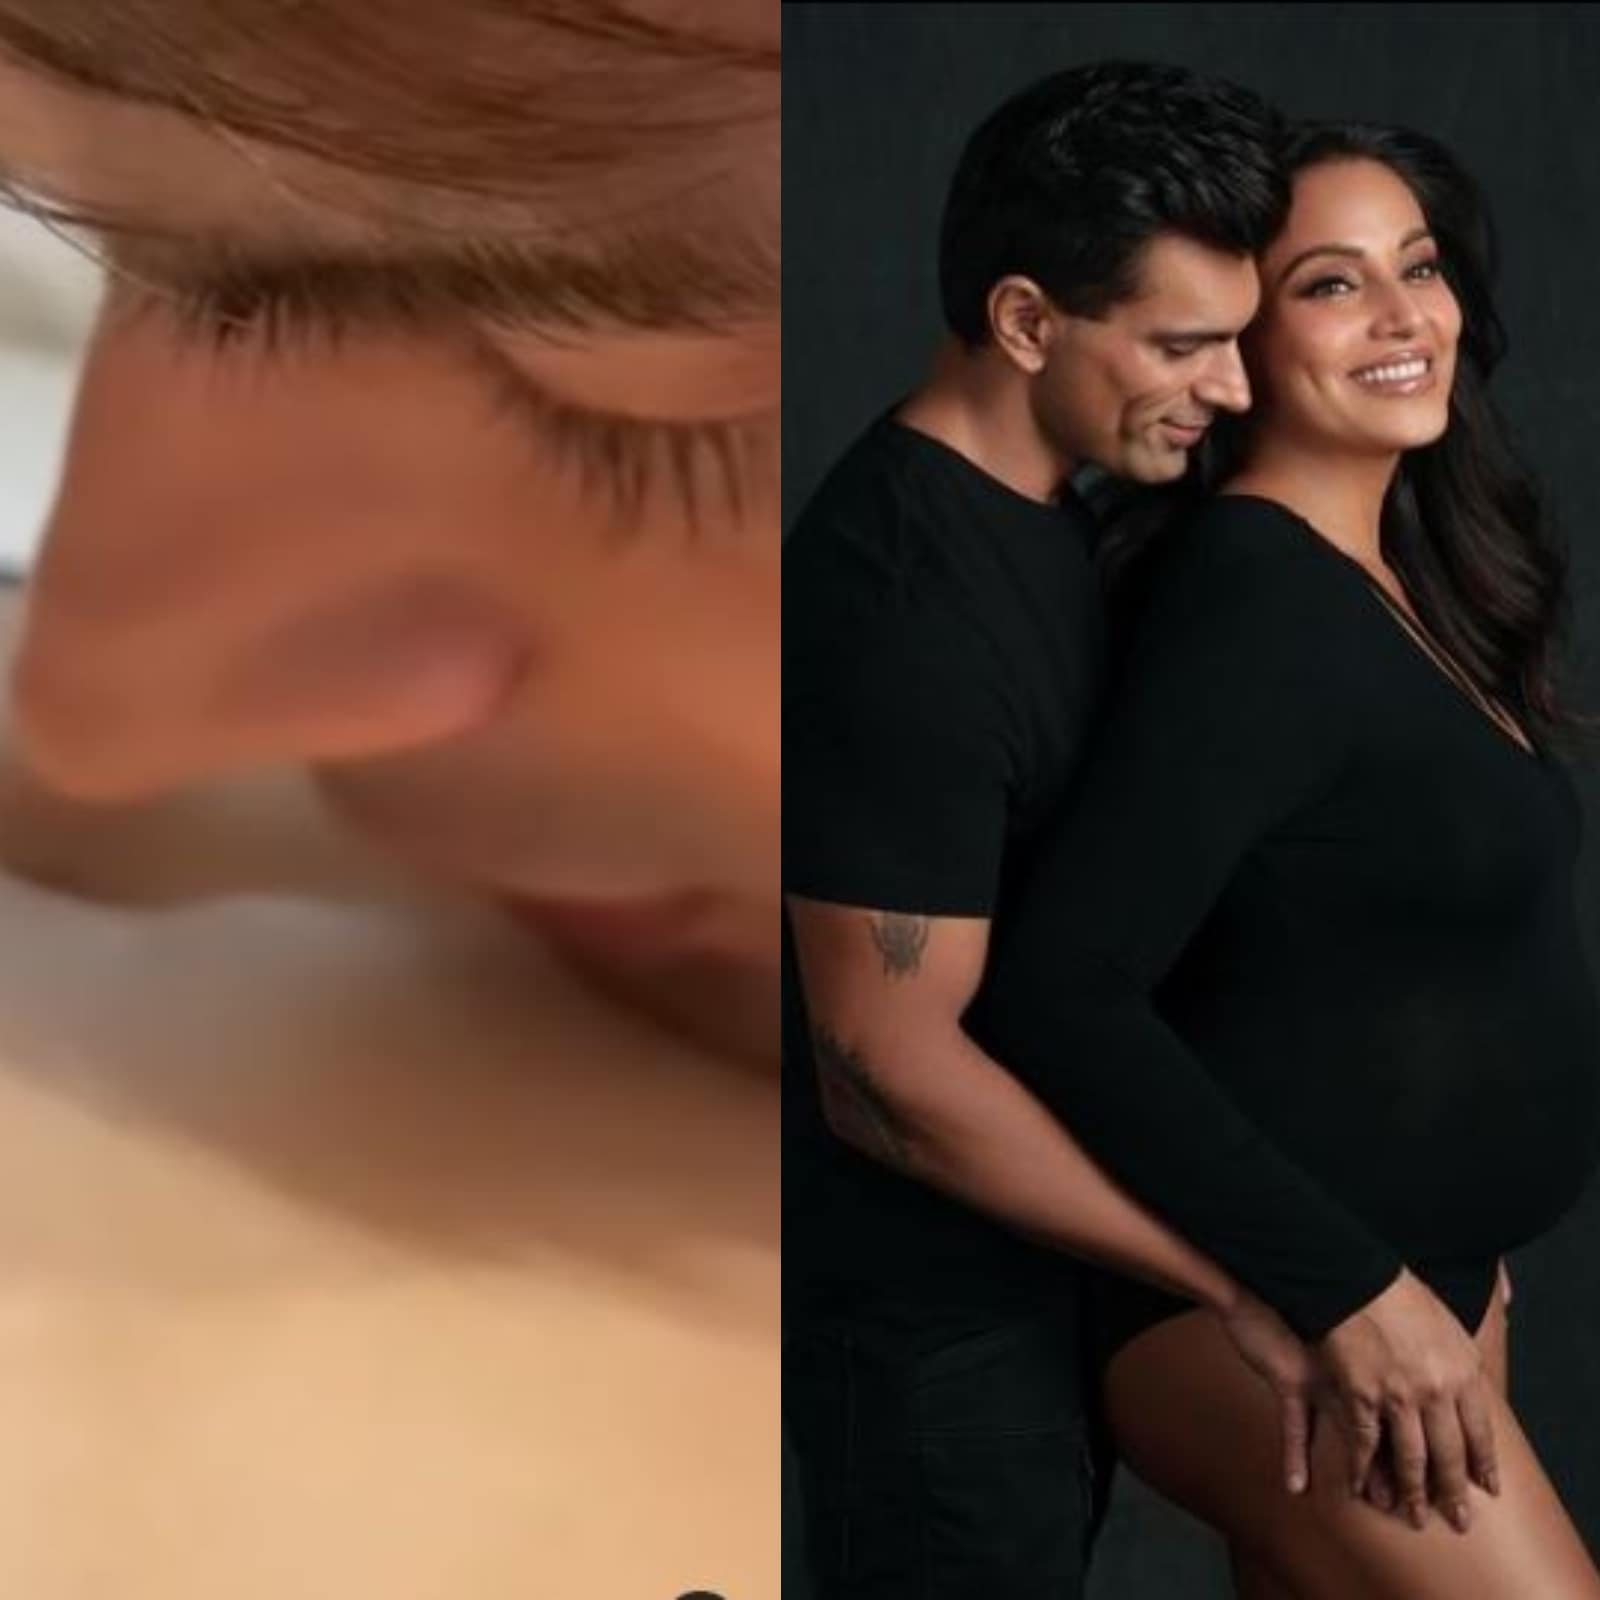 Bipasha Basu Shares Adorable Clip of Hubby Karan Singh Grover 'Singing,  Talking' to the 'Baby in the Womb' - News18